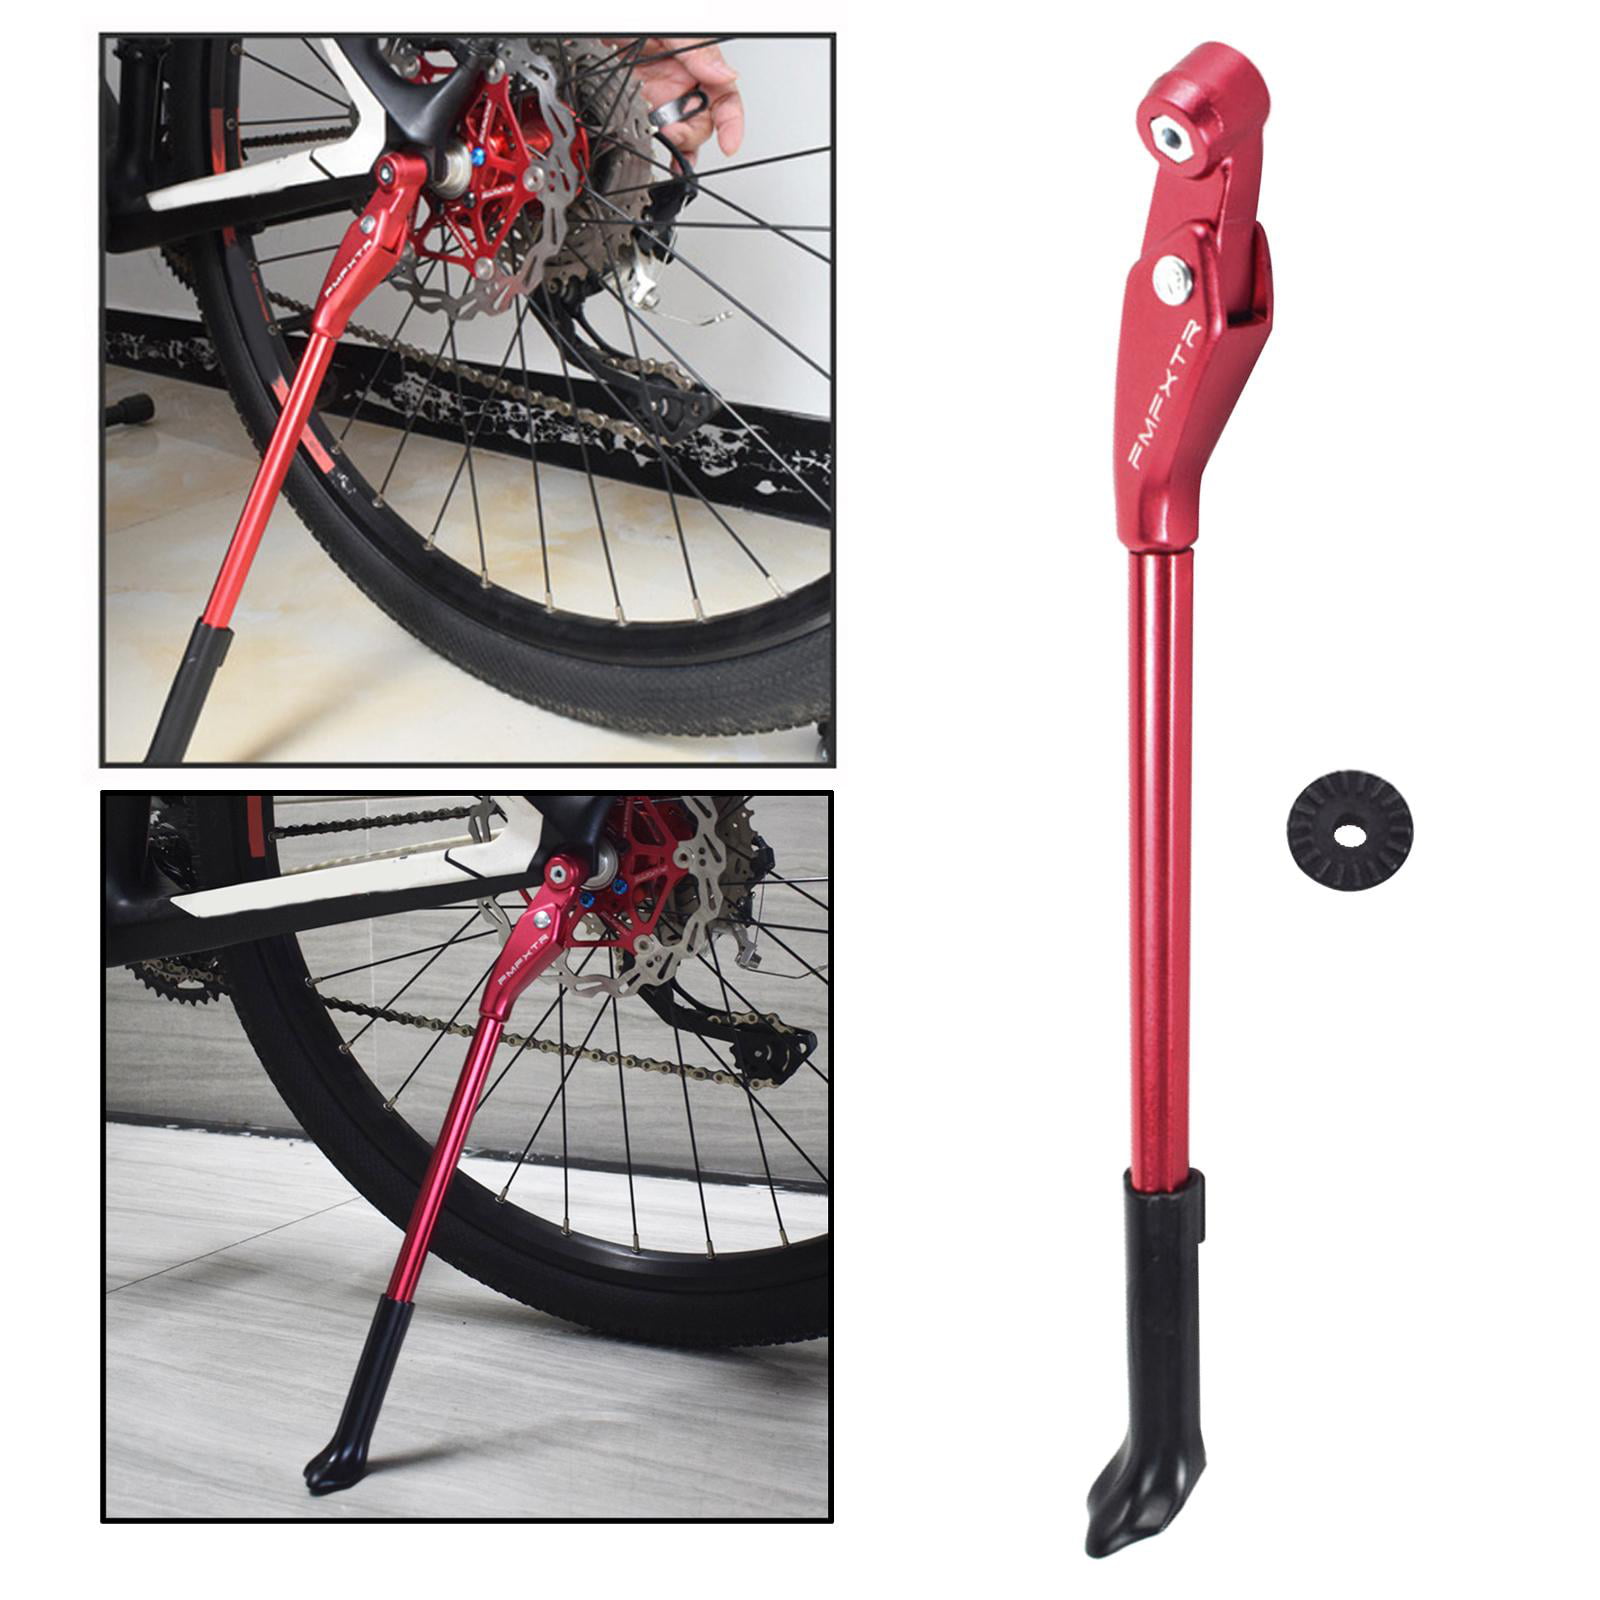 Only for Bicycles with Oval and Rectangular Chain Frames Robson Bicycle Kickstand Adjustable Bike Bracket Anti-Skid Bicycle Rear Kickstand Suitable for Bicycles with a Tire Diameter of 22-27 